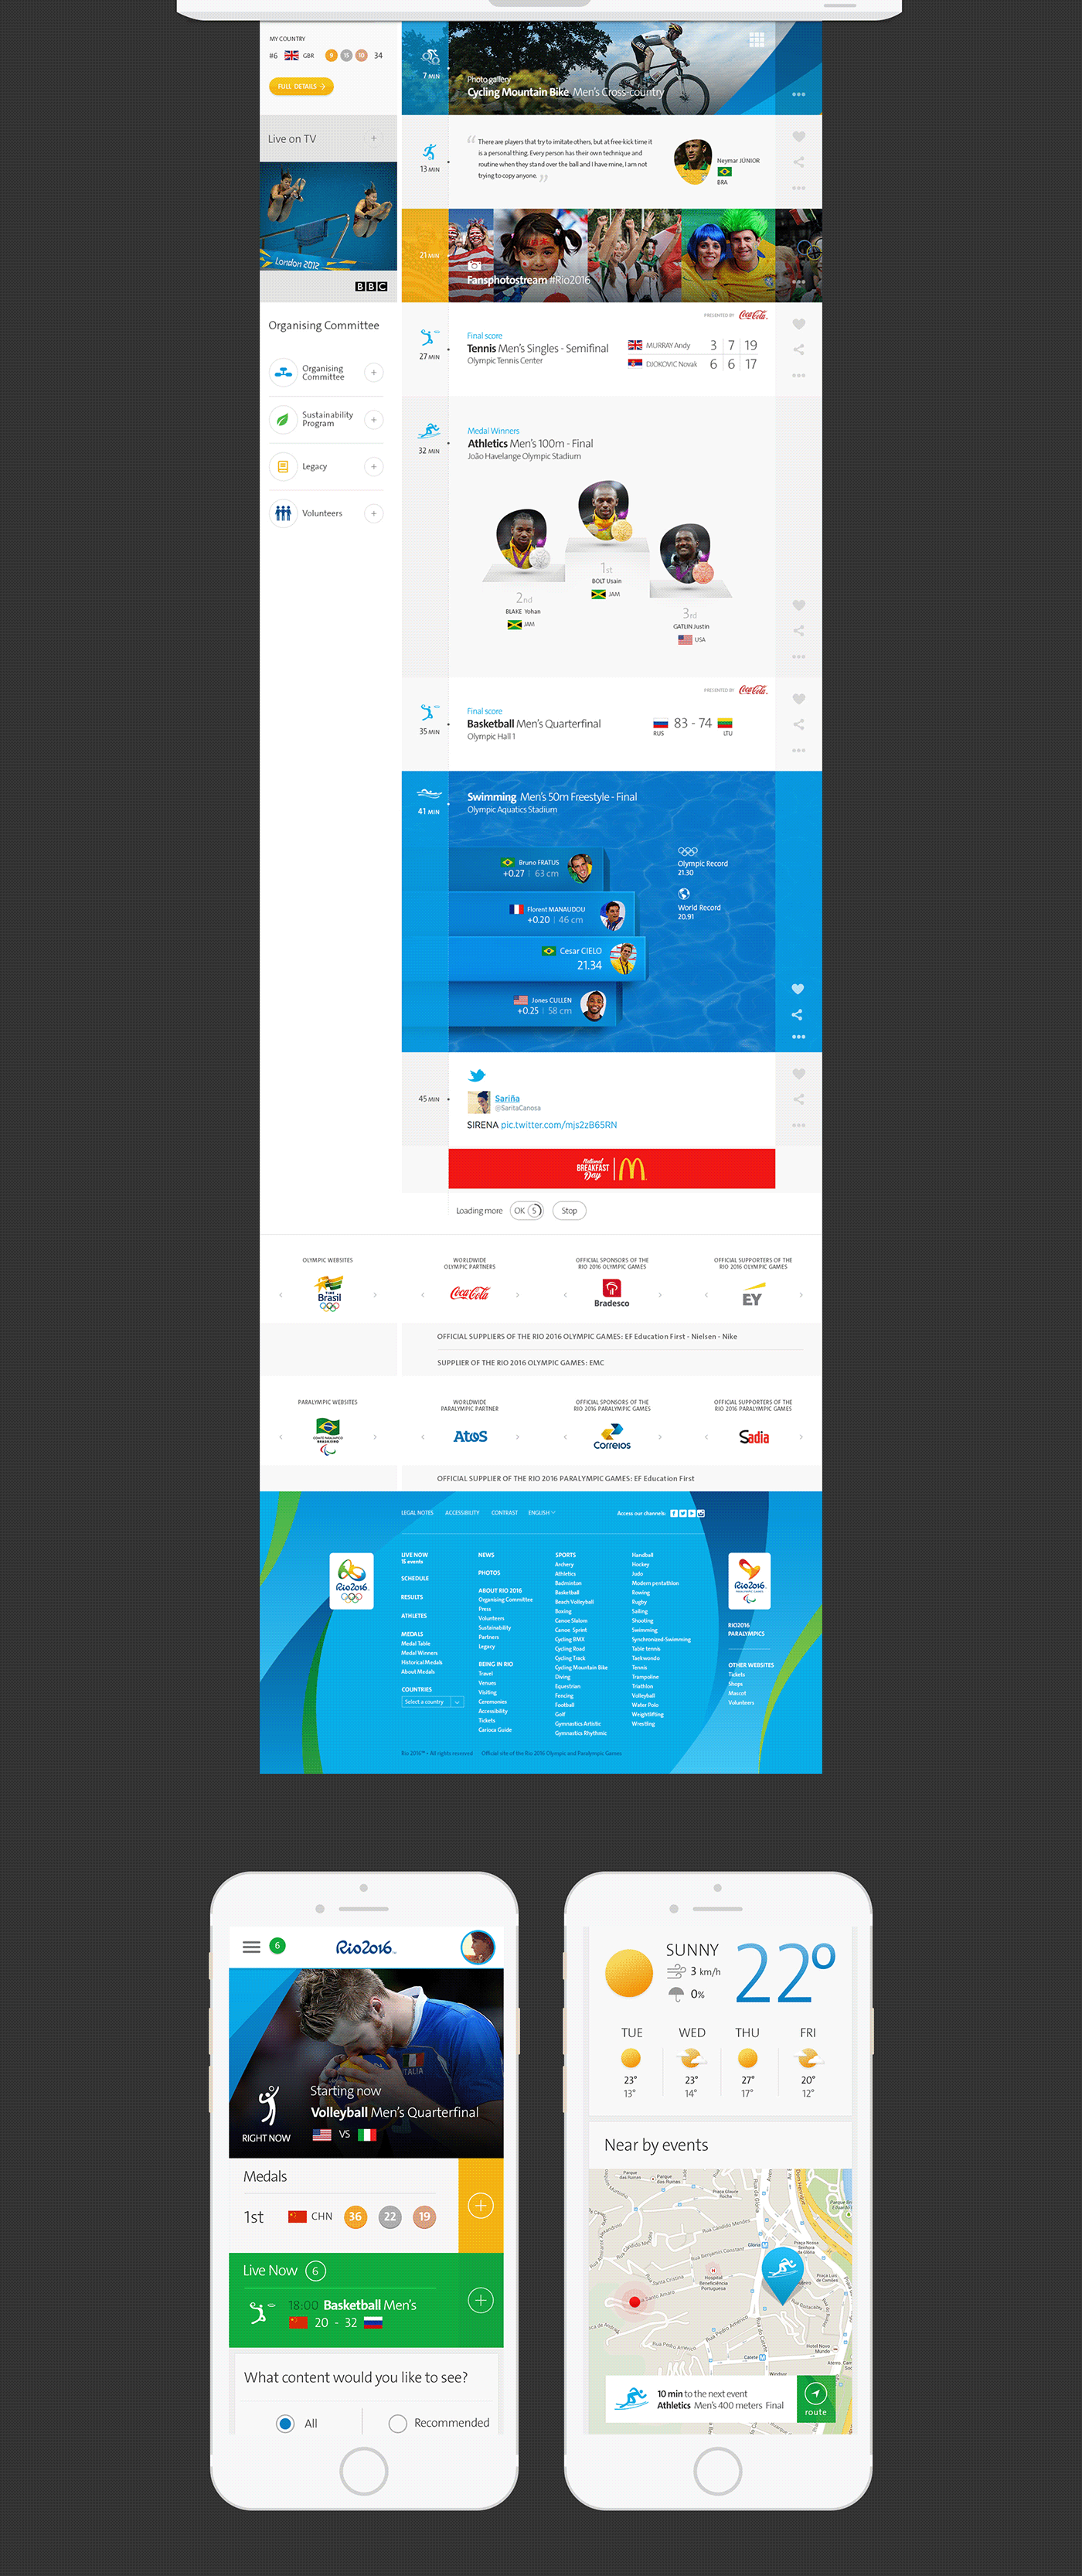 rio2016 Olympics Olympic Games infographic Website UI/UX